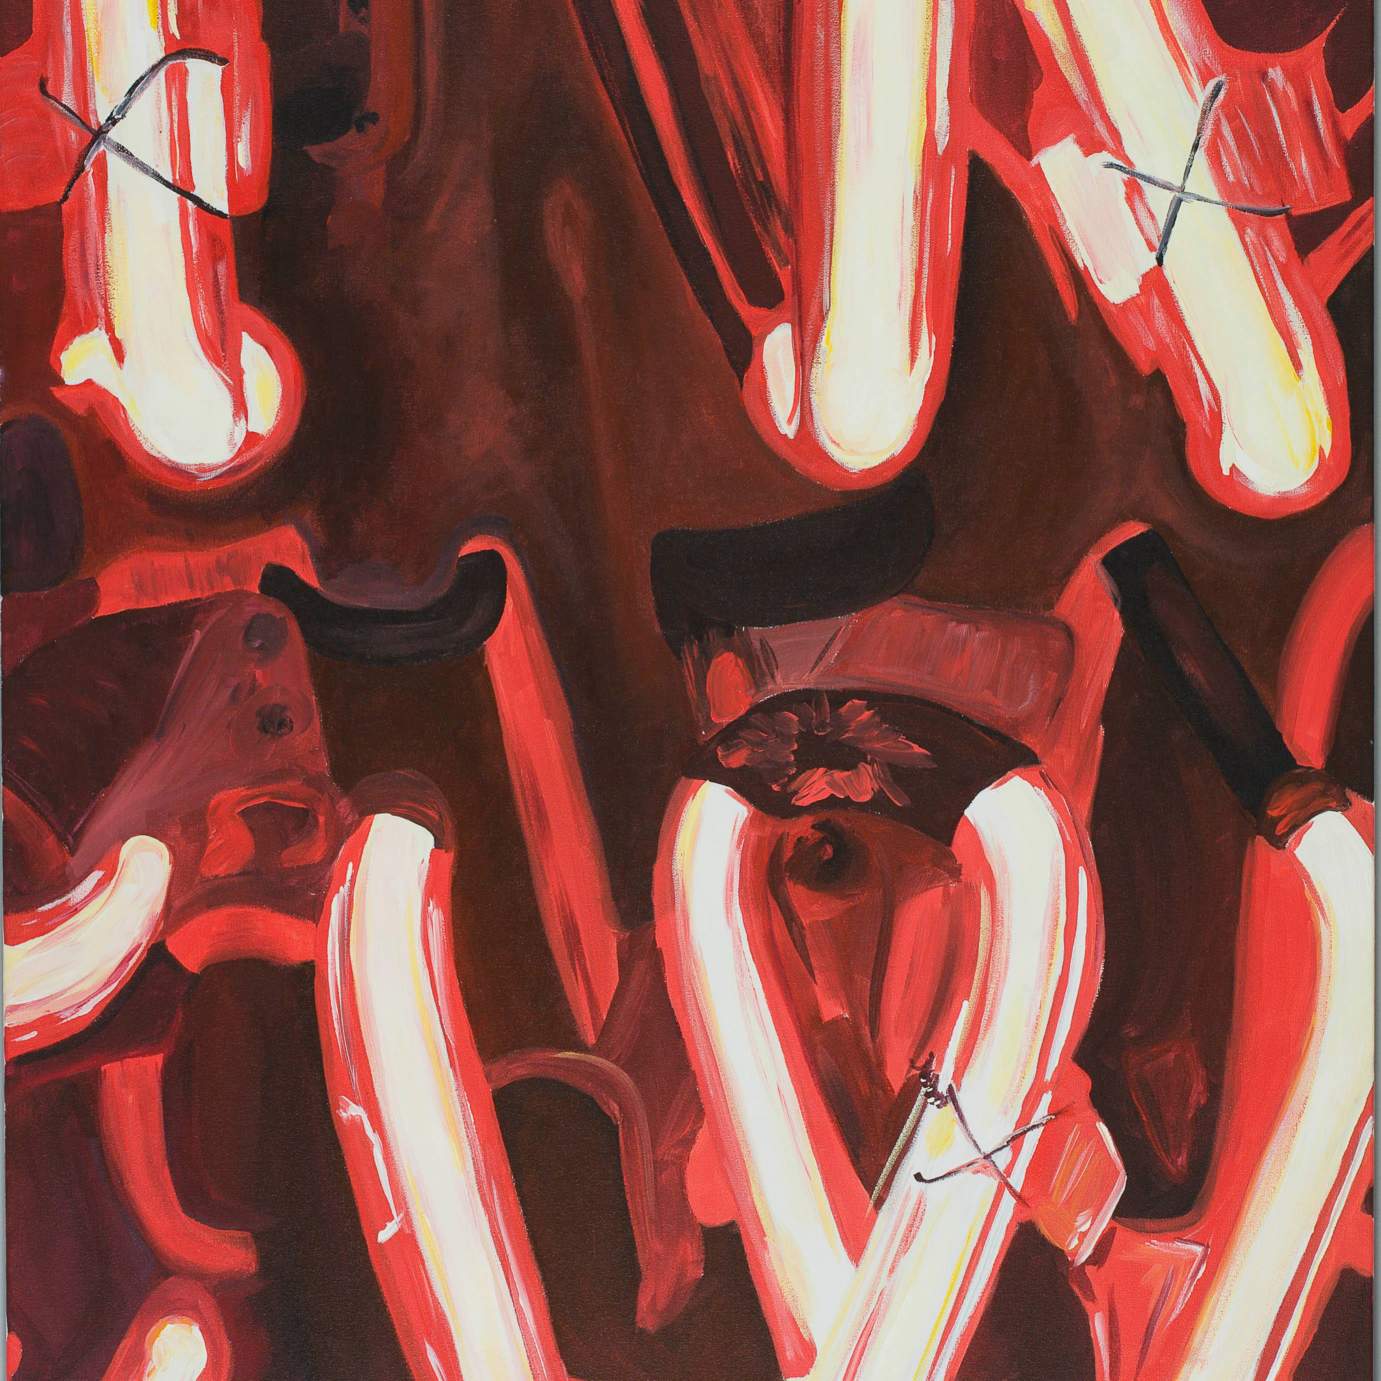 Student work: an illegible close-up painting of neon signage